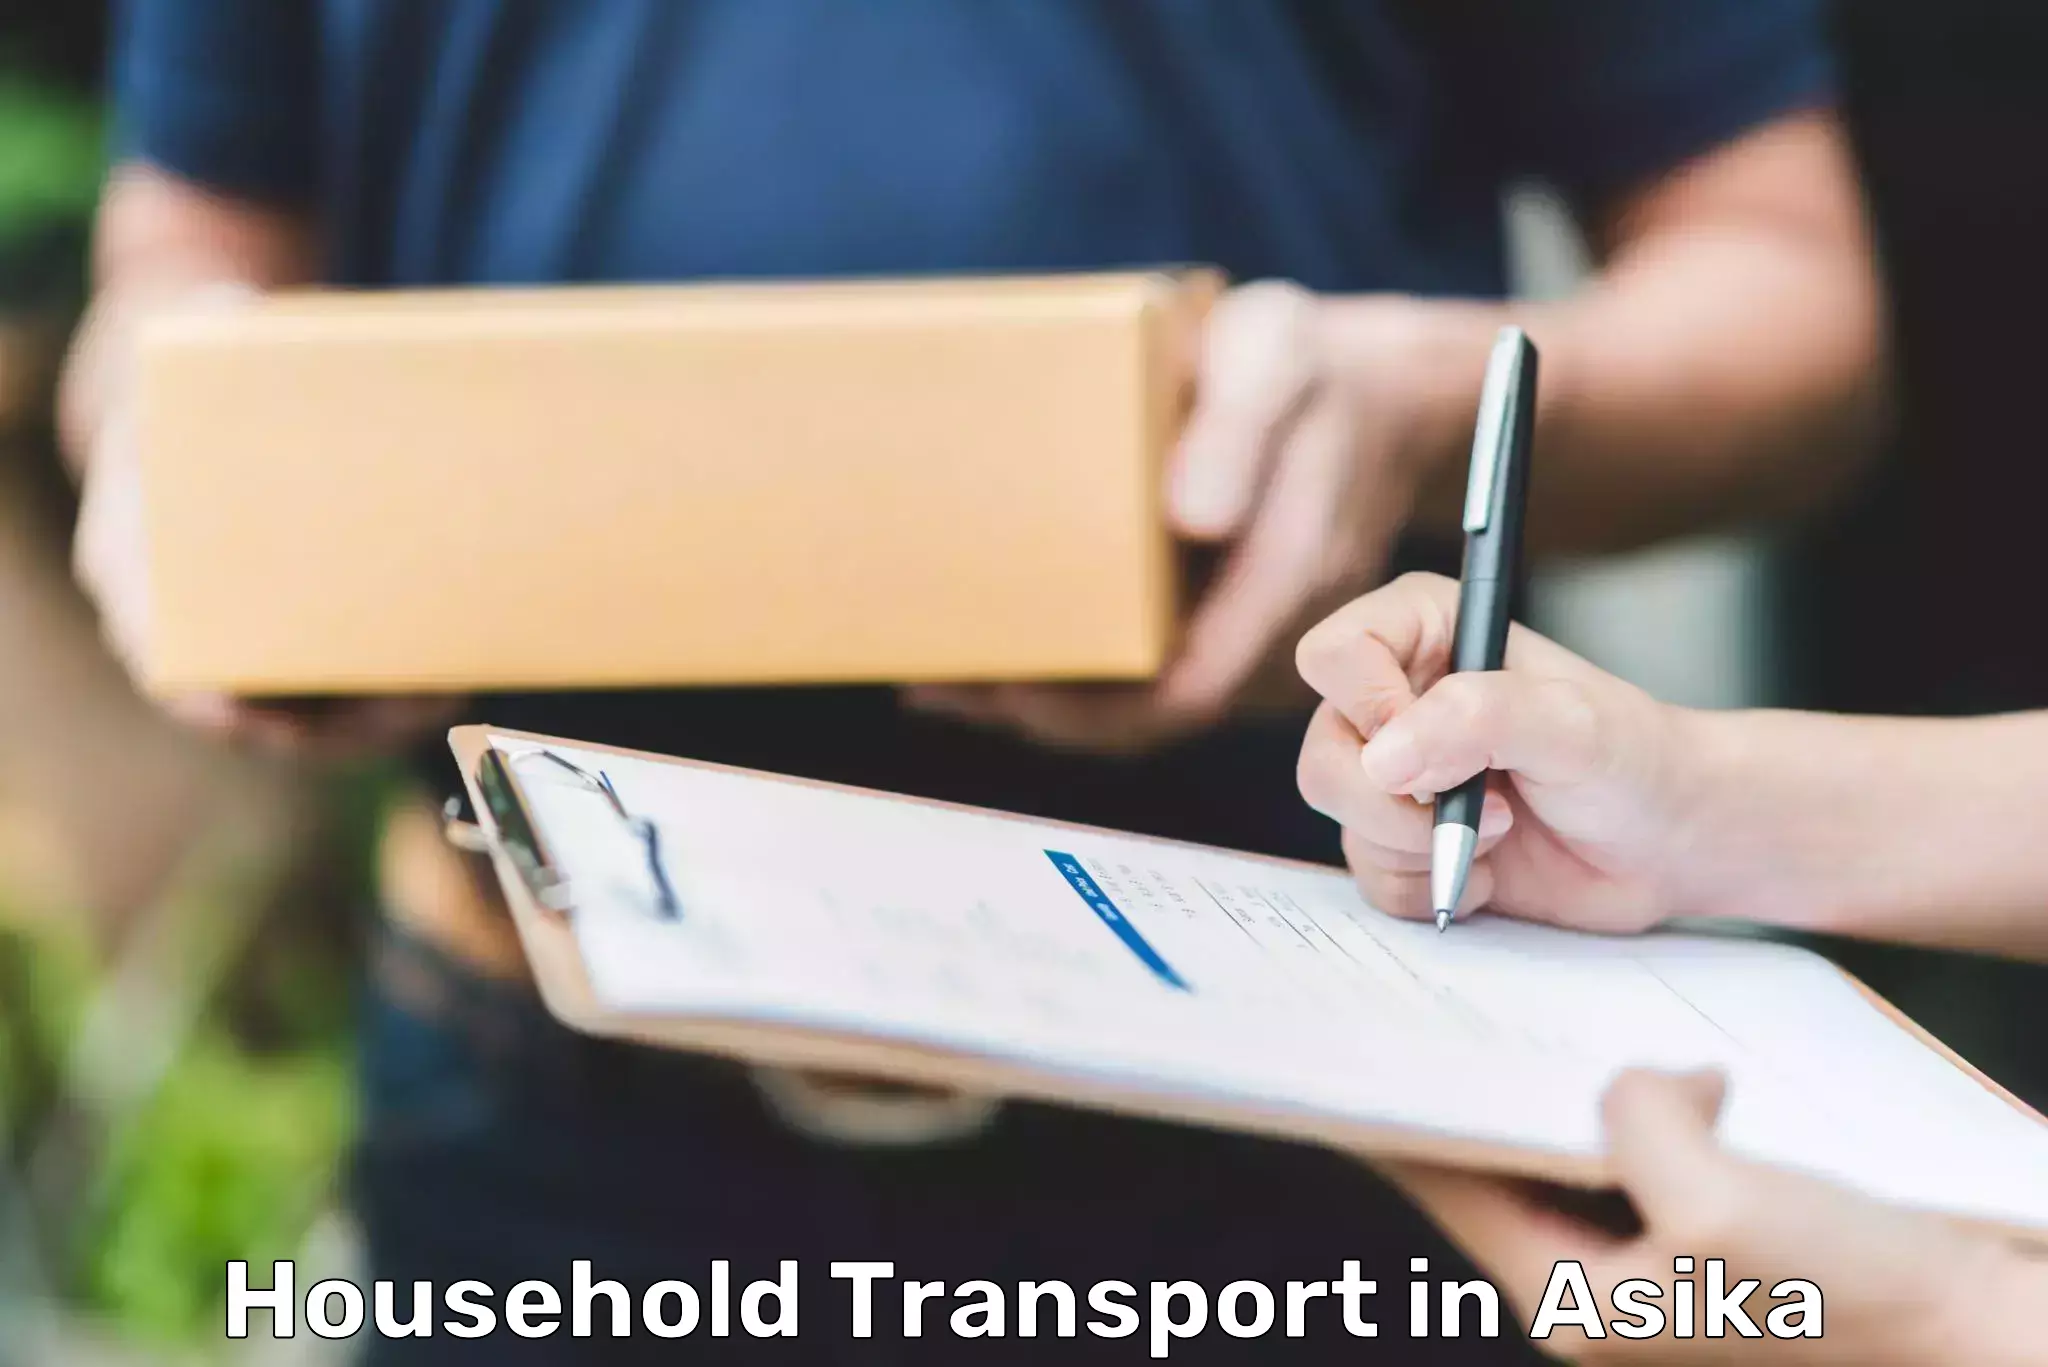 Household transport experts in Asika